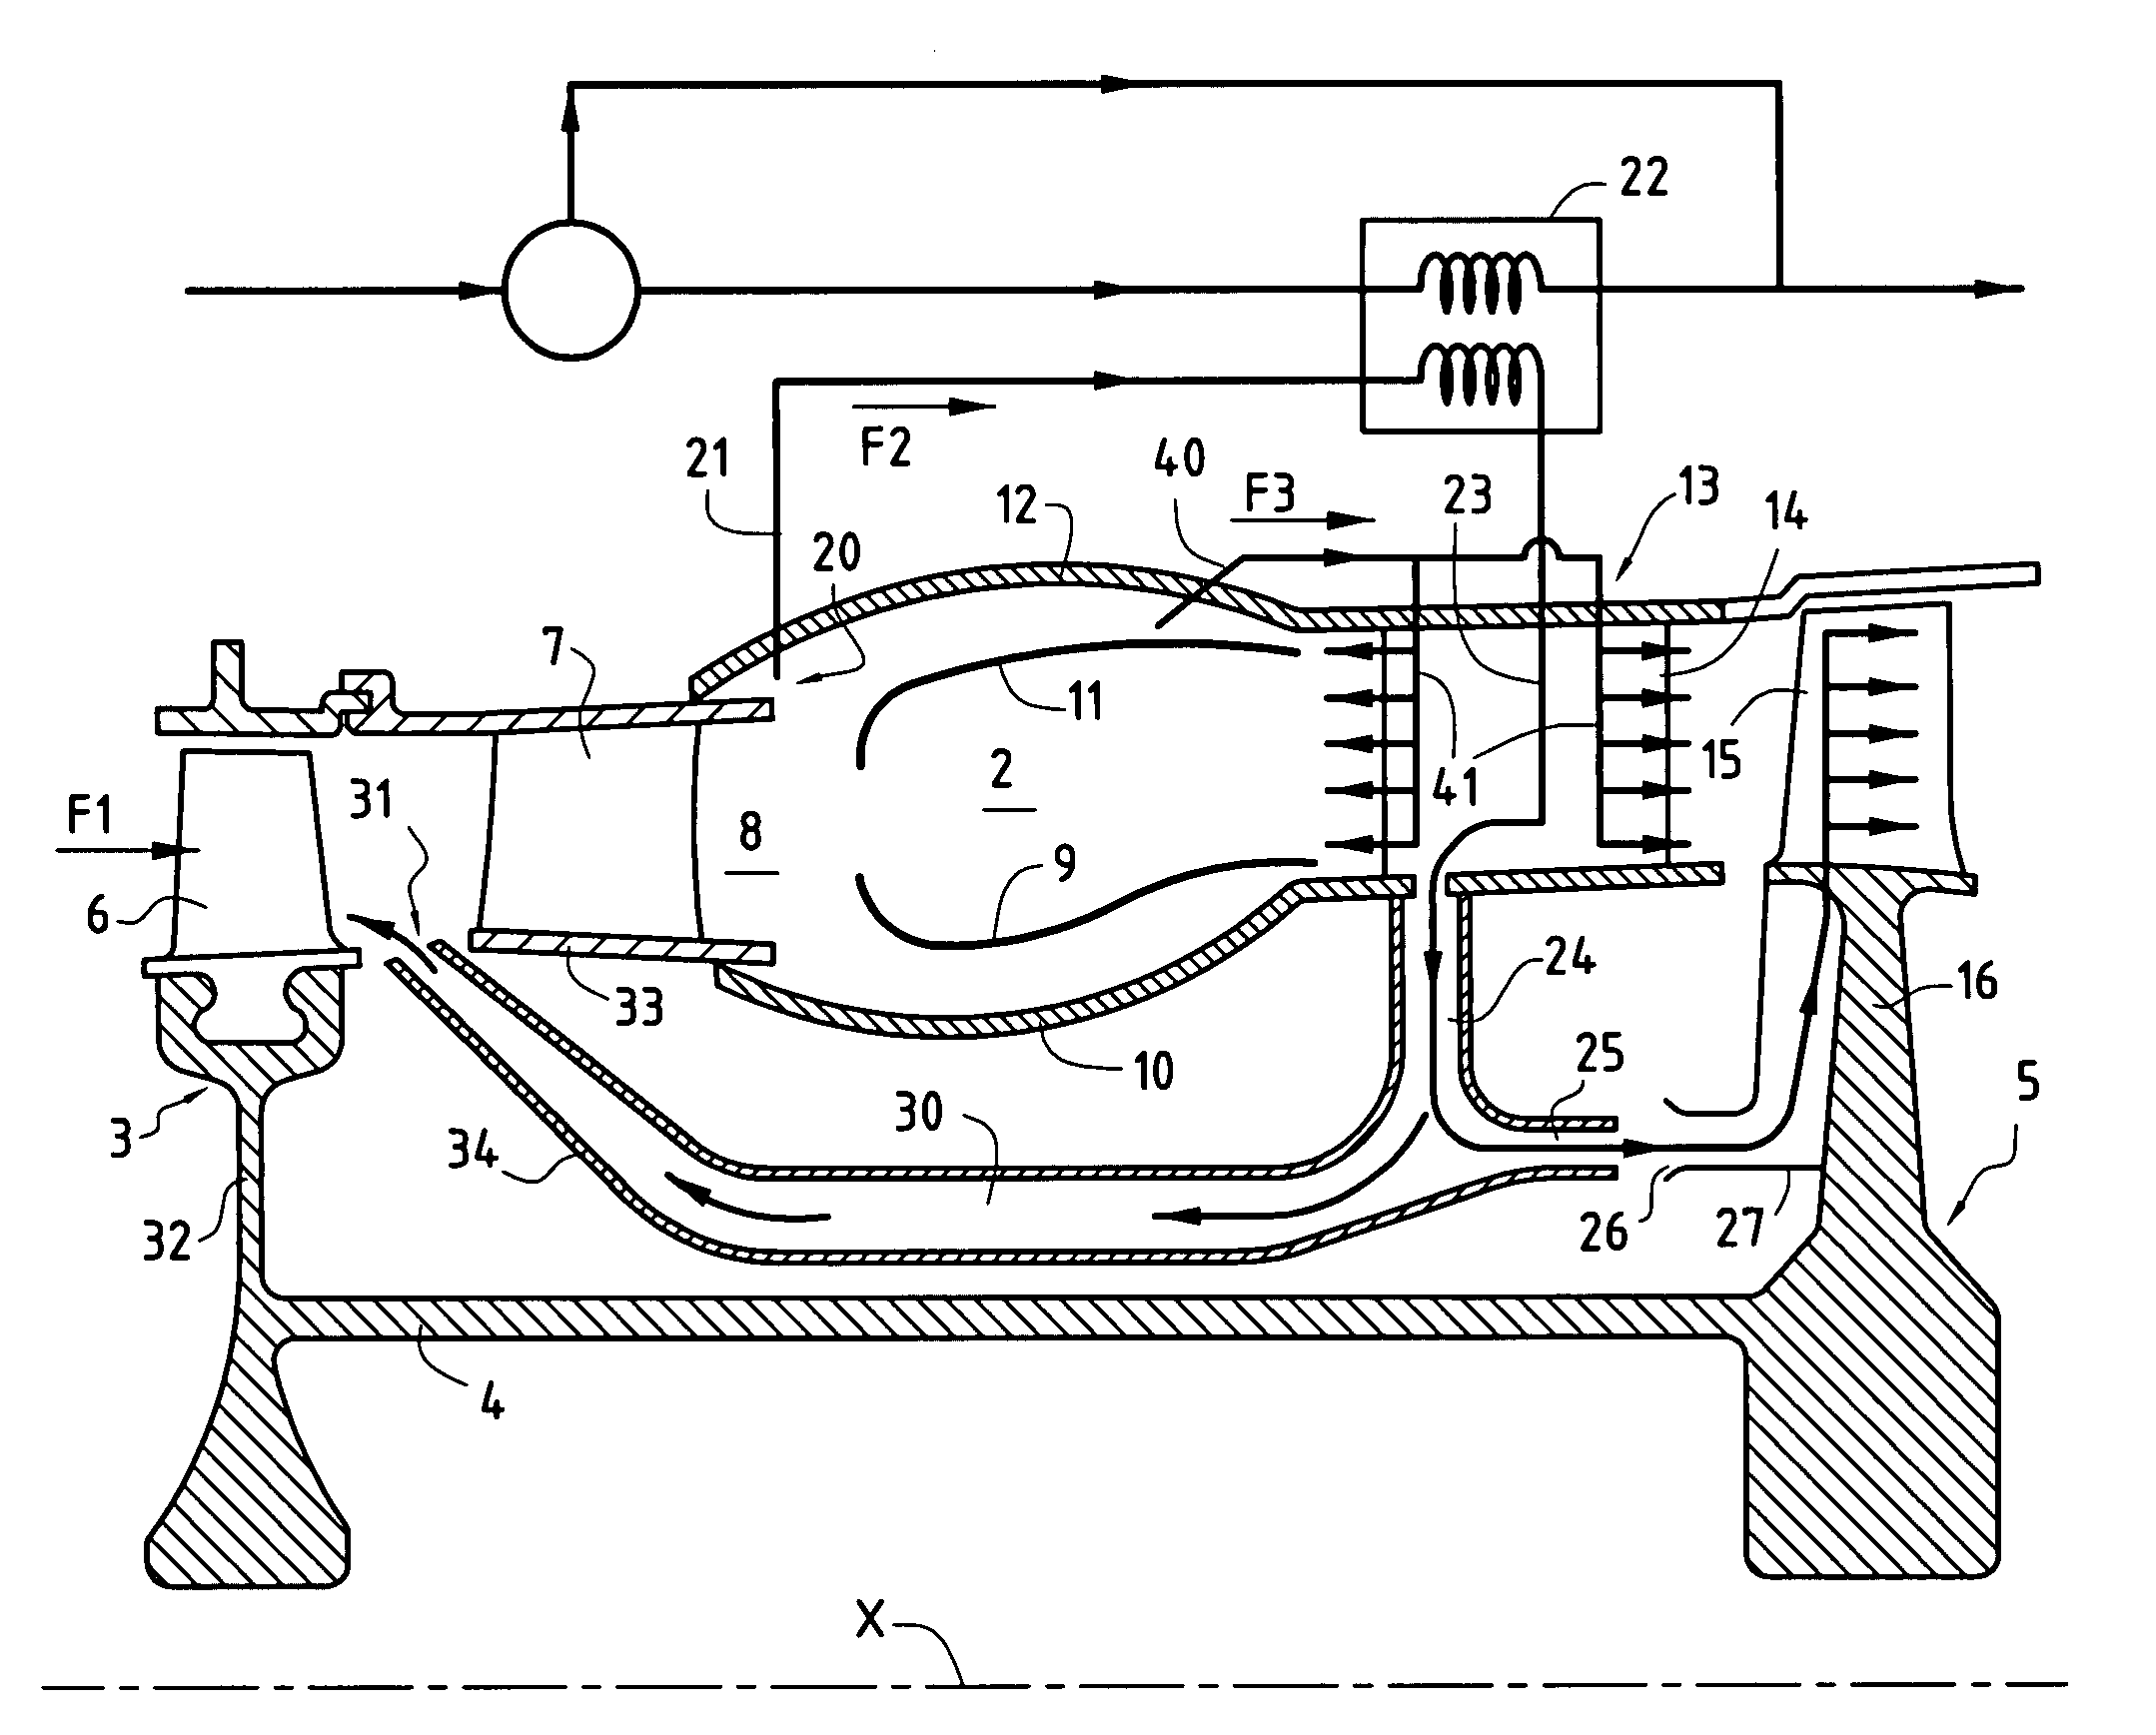 Heat exchanger on a turbine cooling circuit